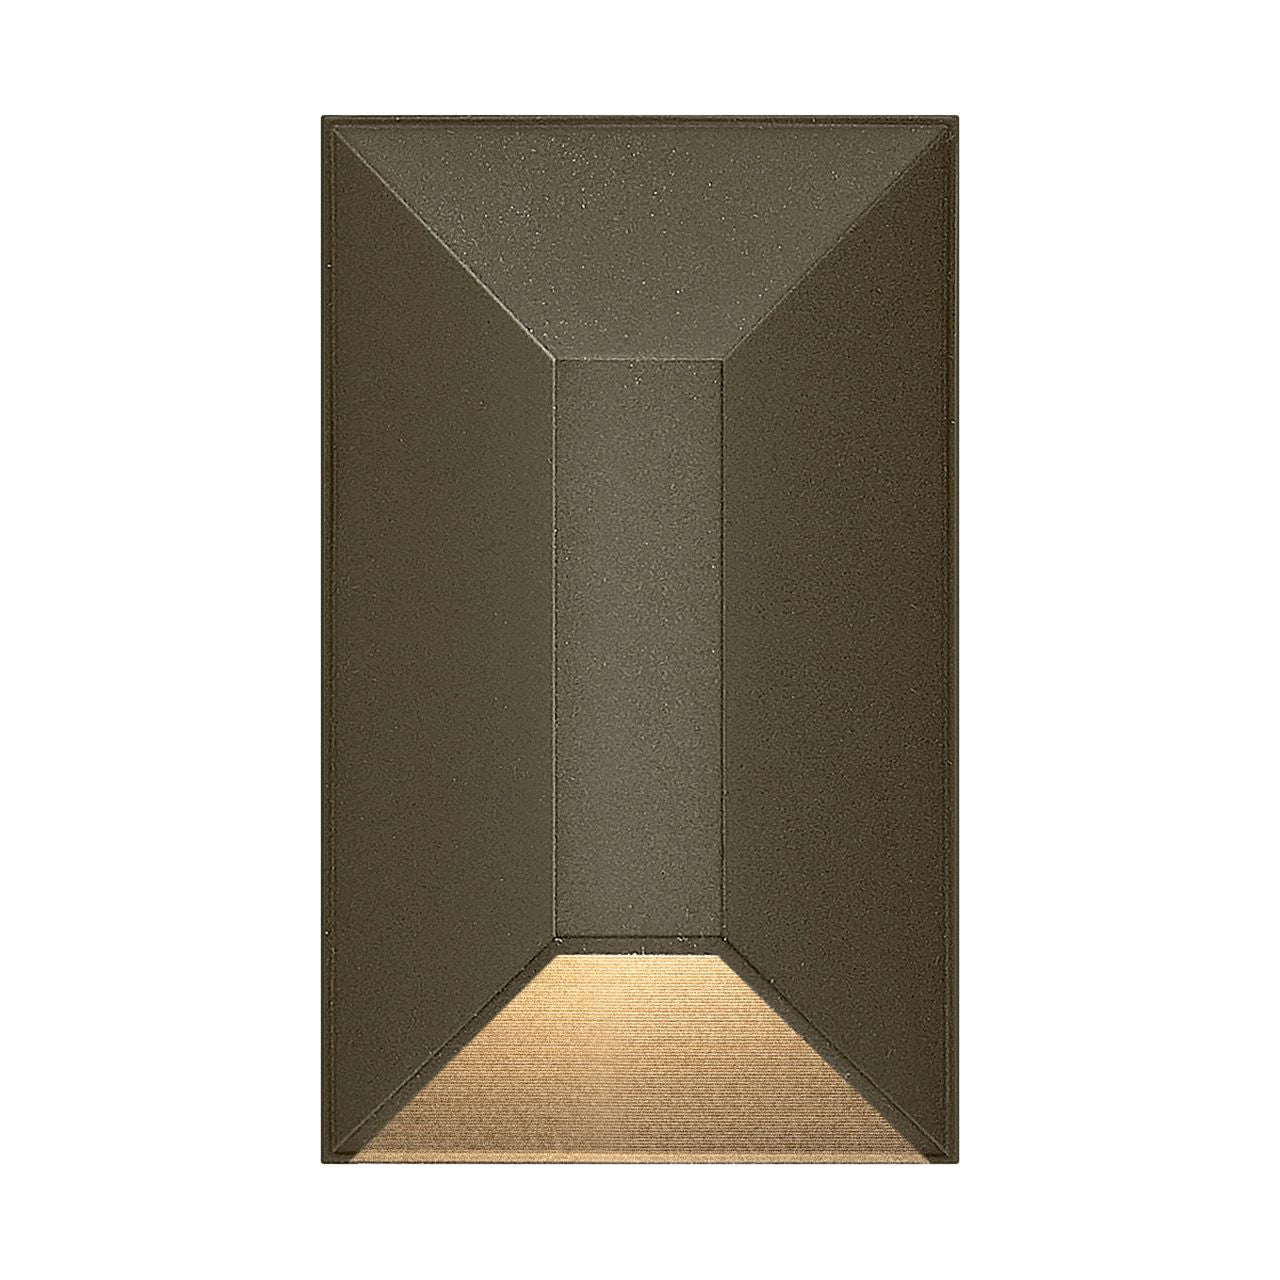 Hinkley Canada - 15223BZ - LED Wall Sconce - Nuvi Deck Sconce - Bronze